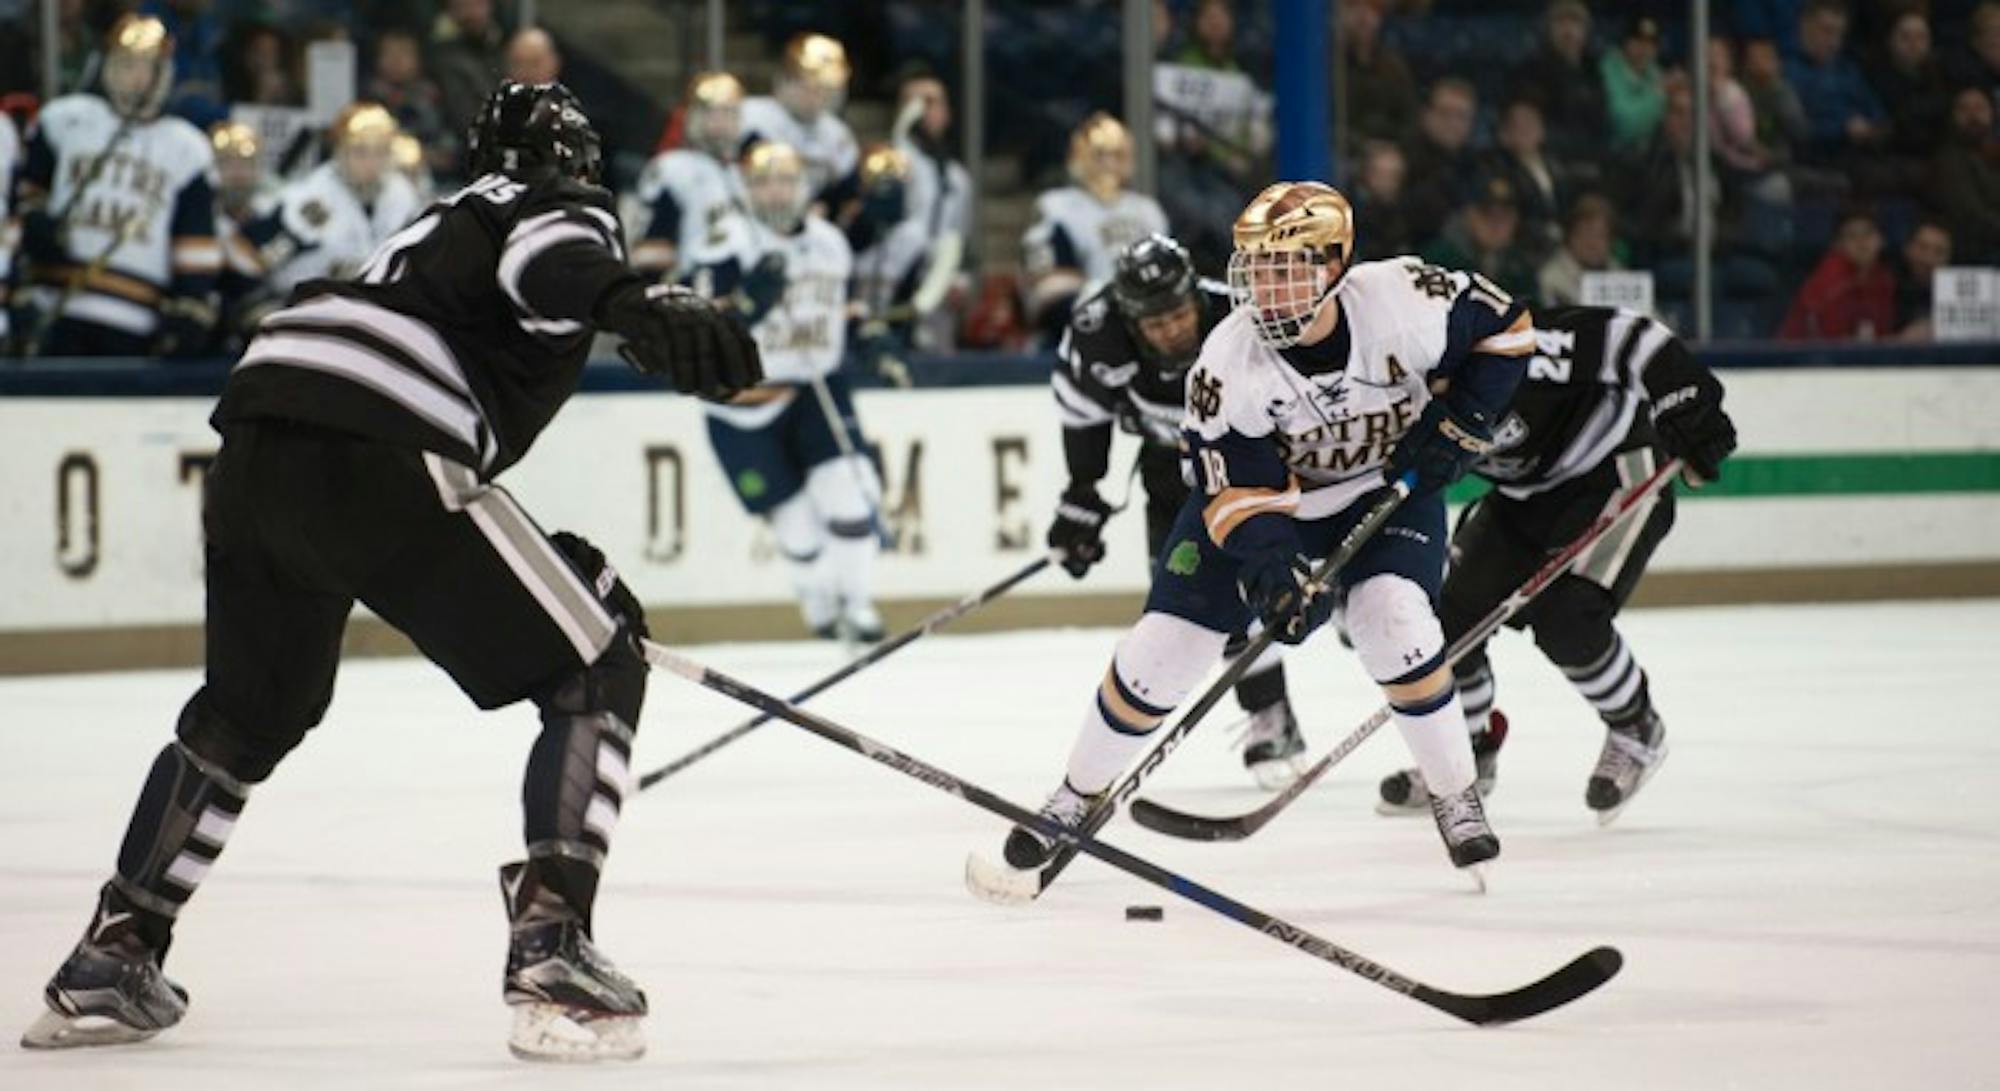 Irish senior forward Jake Evans faces a defender during Notre Dame’s 5-2 victory over Providence at Compton Family Ice Arena on Mar. 11. Evans finished last season with 13 goals and 29 assists for a total of 42 points in 40 games. Evans earned the second most points on the team, behind Anders Bjork, who graduated and now plays for the Boston Bruins.